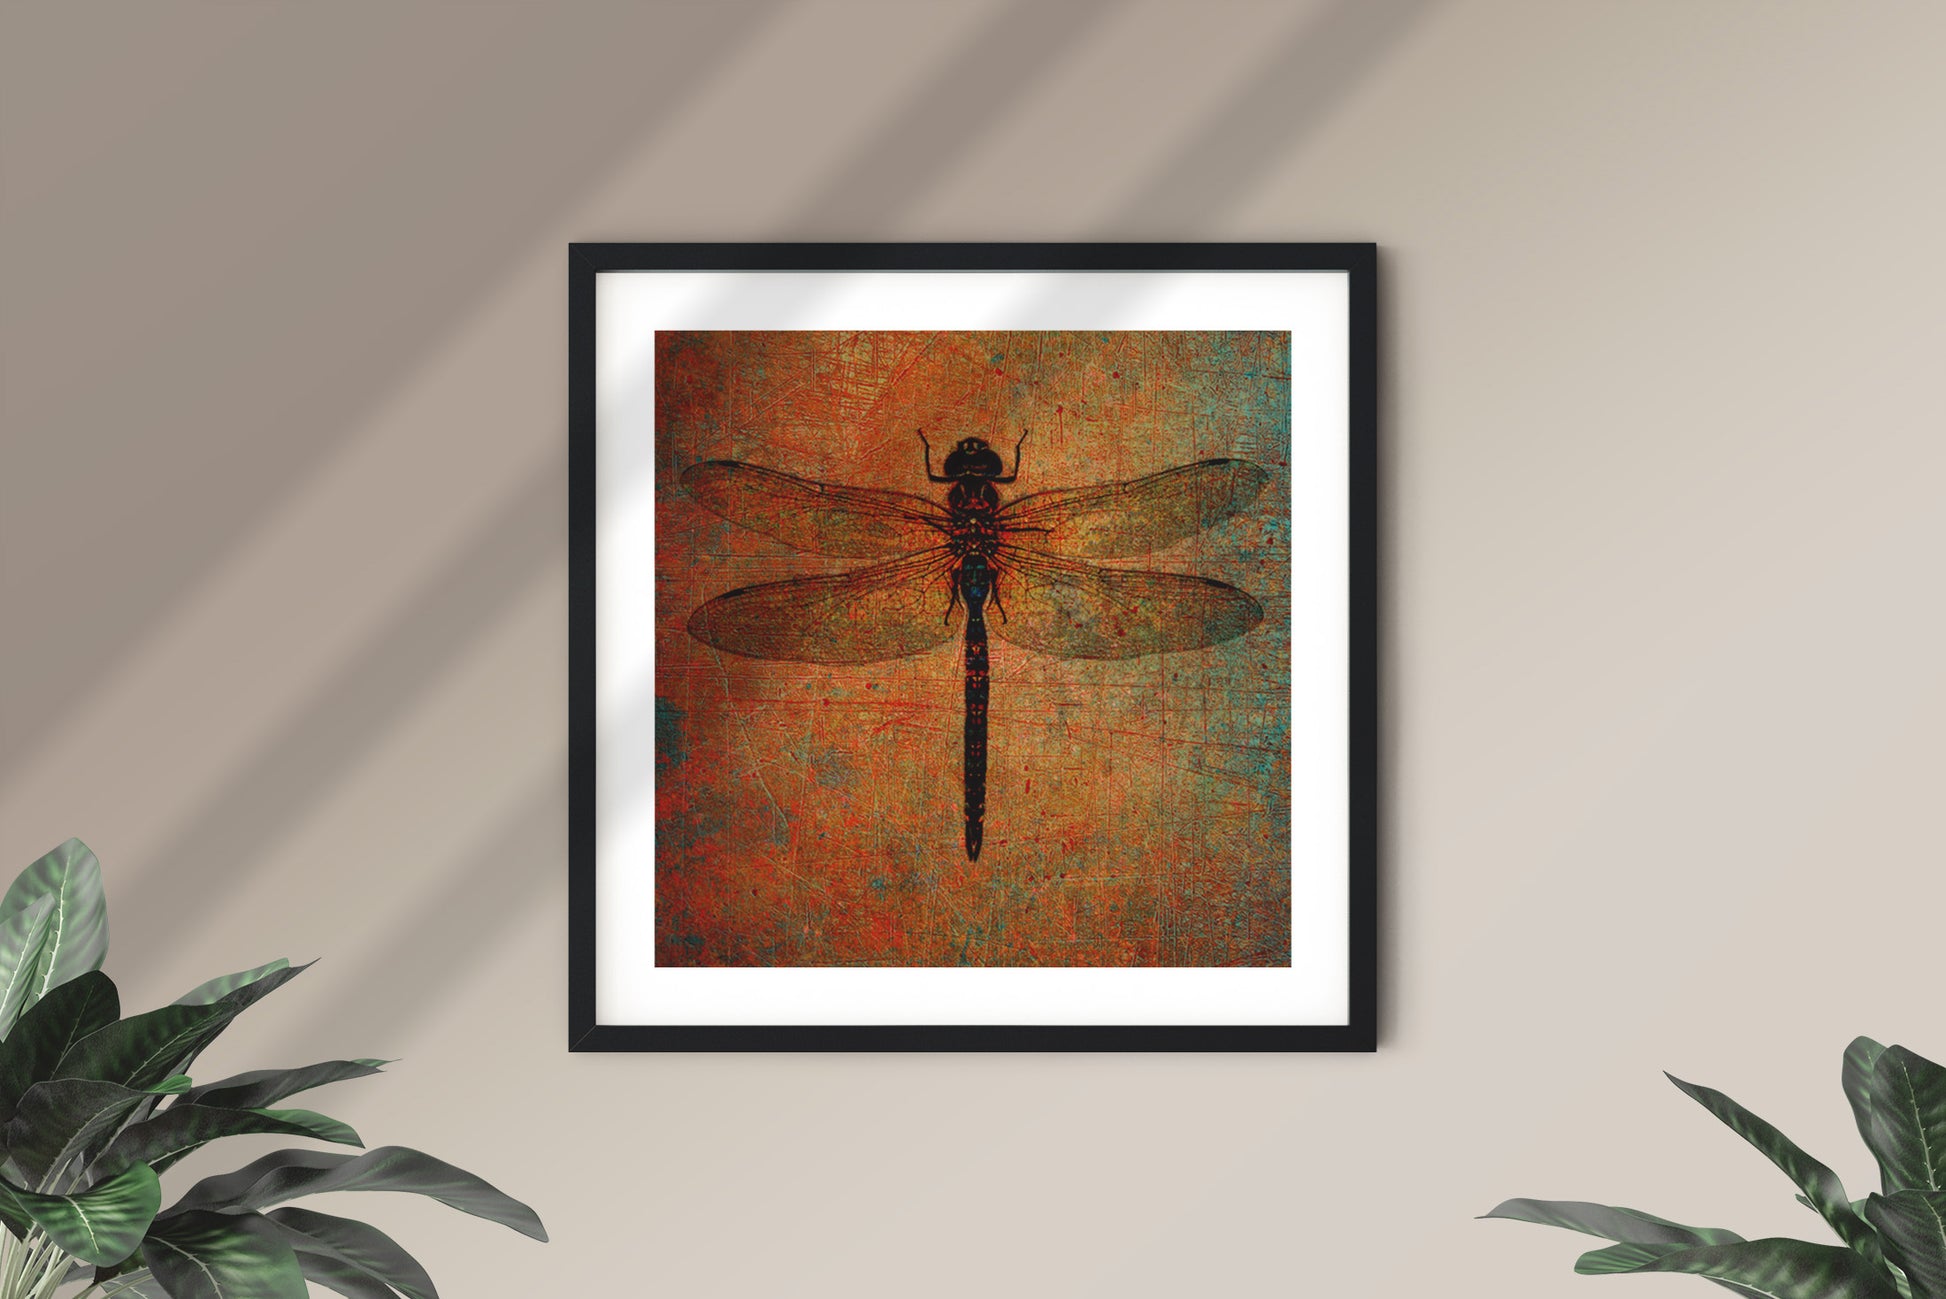 Dragonfly on Distressed Stone Background - Museum-quality Art Print on Archival Paper framed and hung